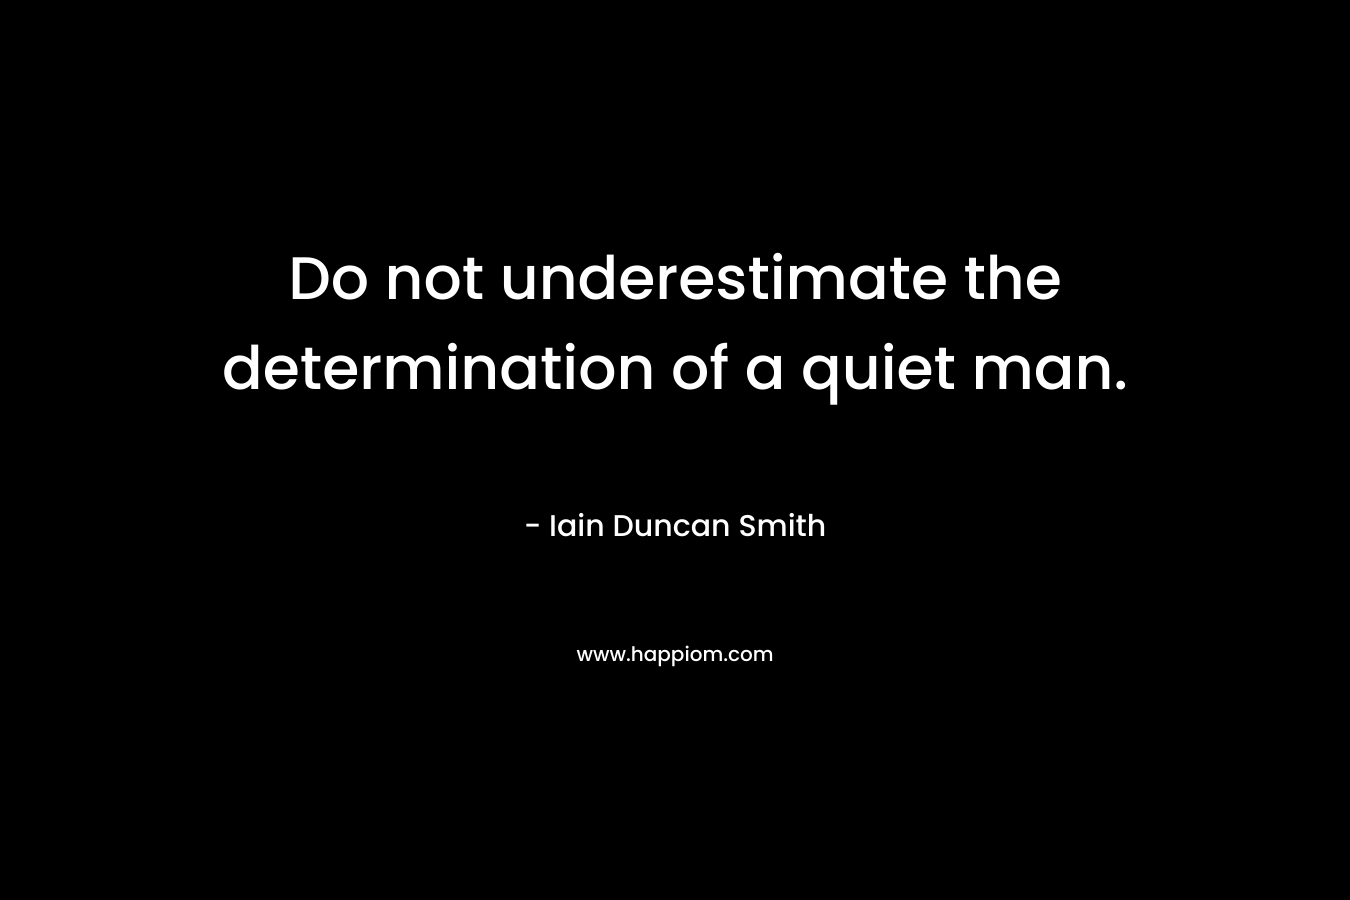 Do not underestimate the determination of a quiet man. – Iain Duncan Smith